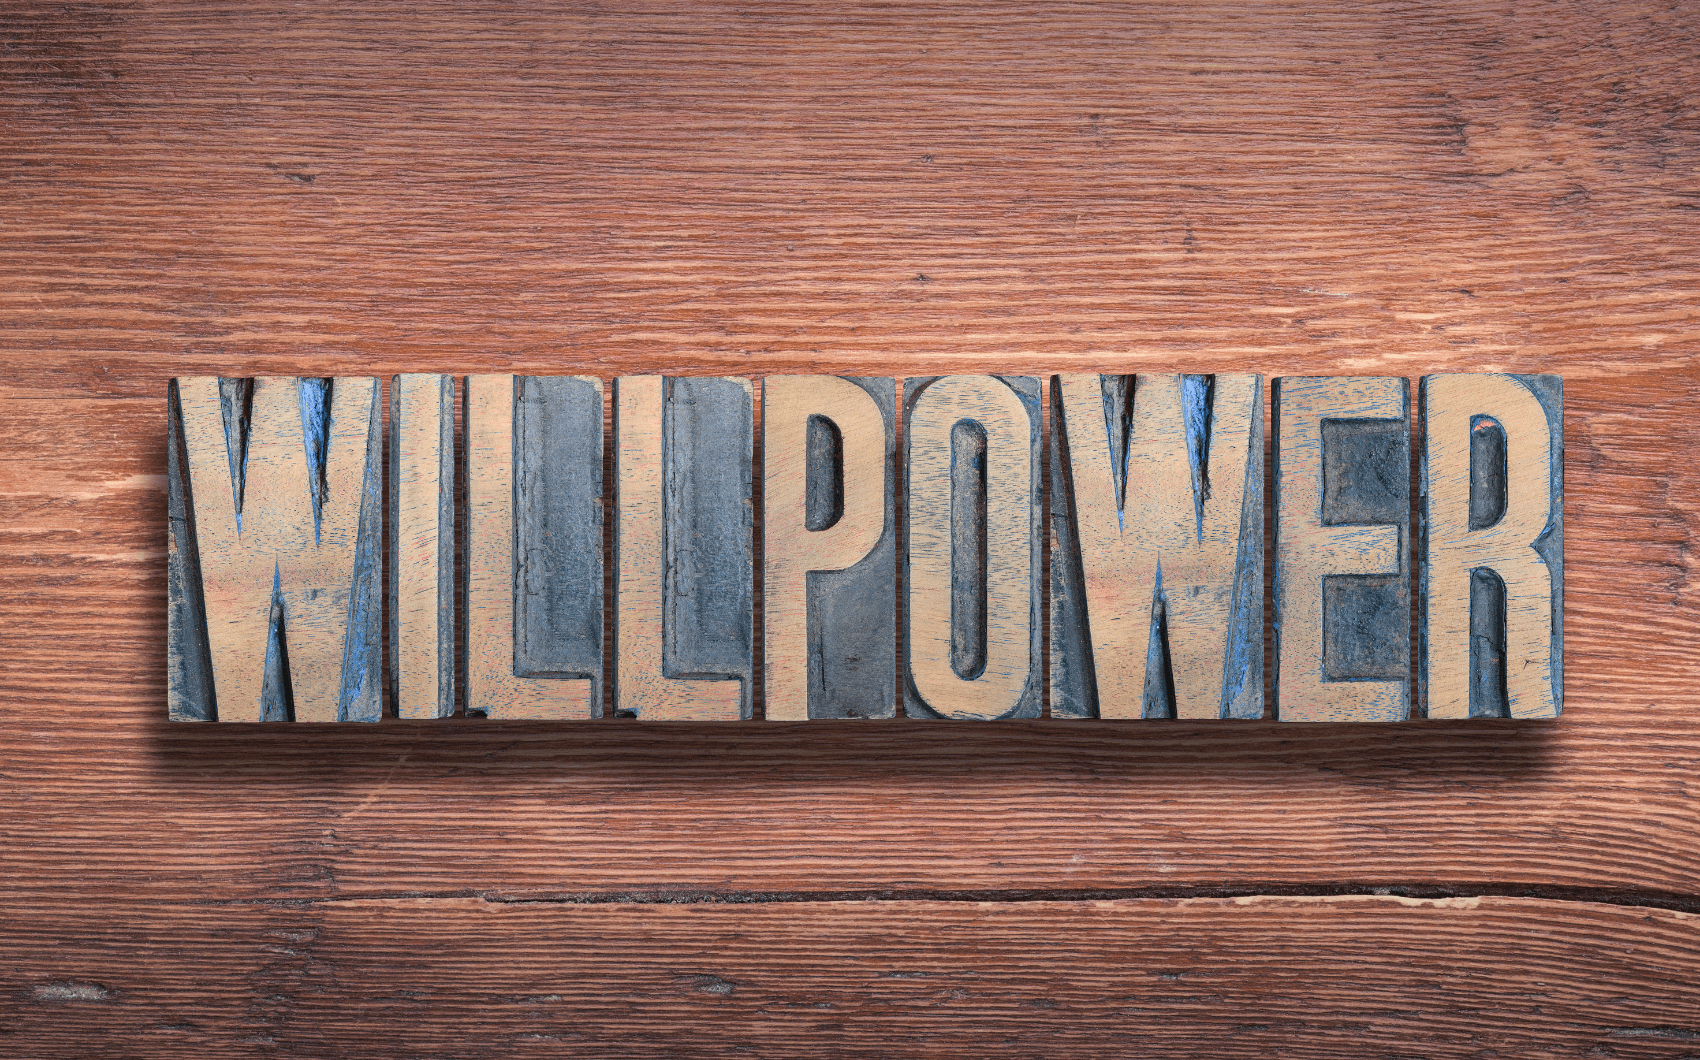 Science of willpower